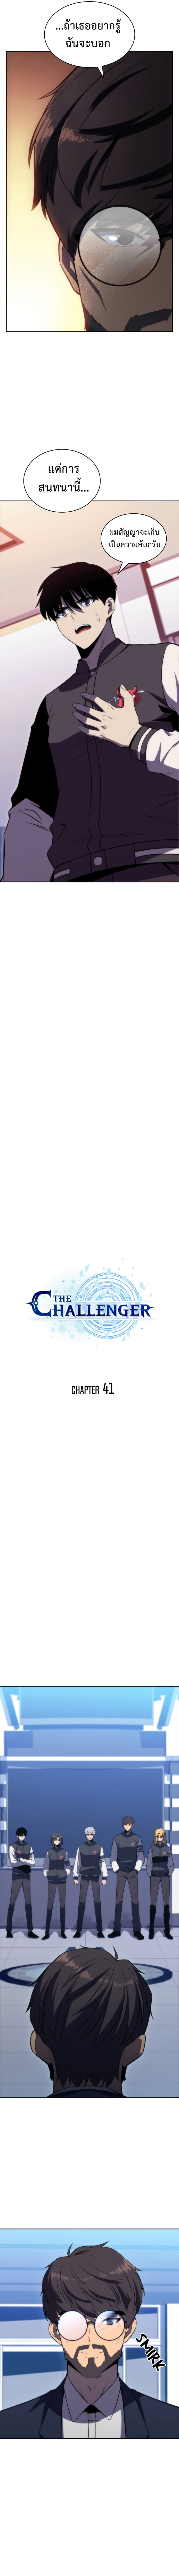 The Challenger 41-41